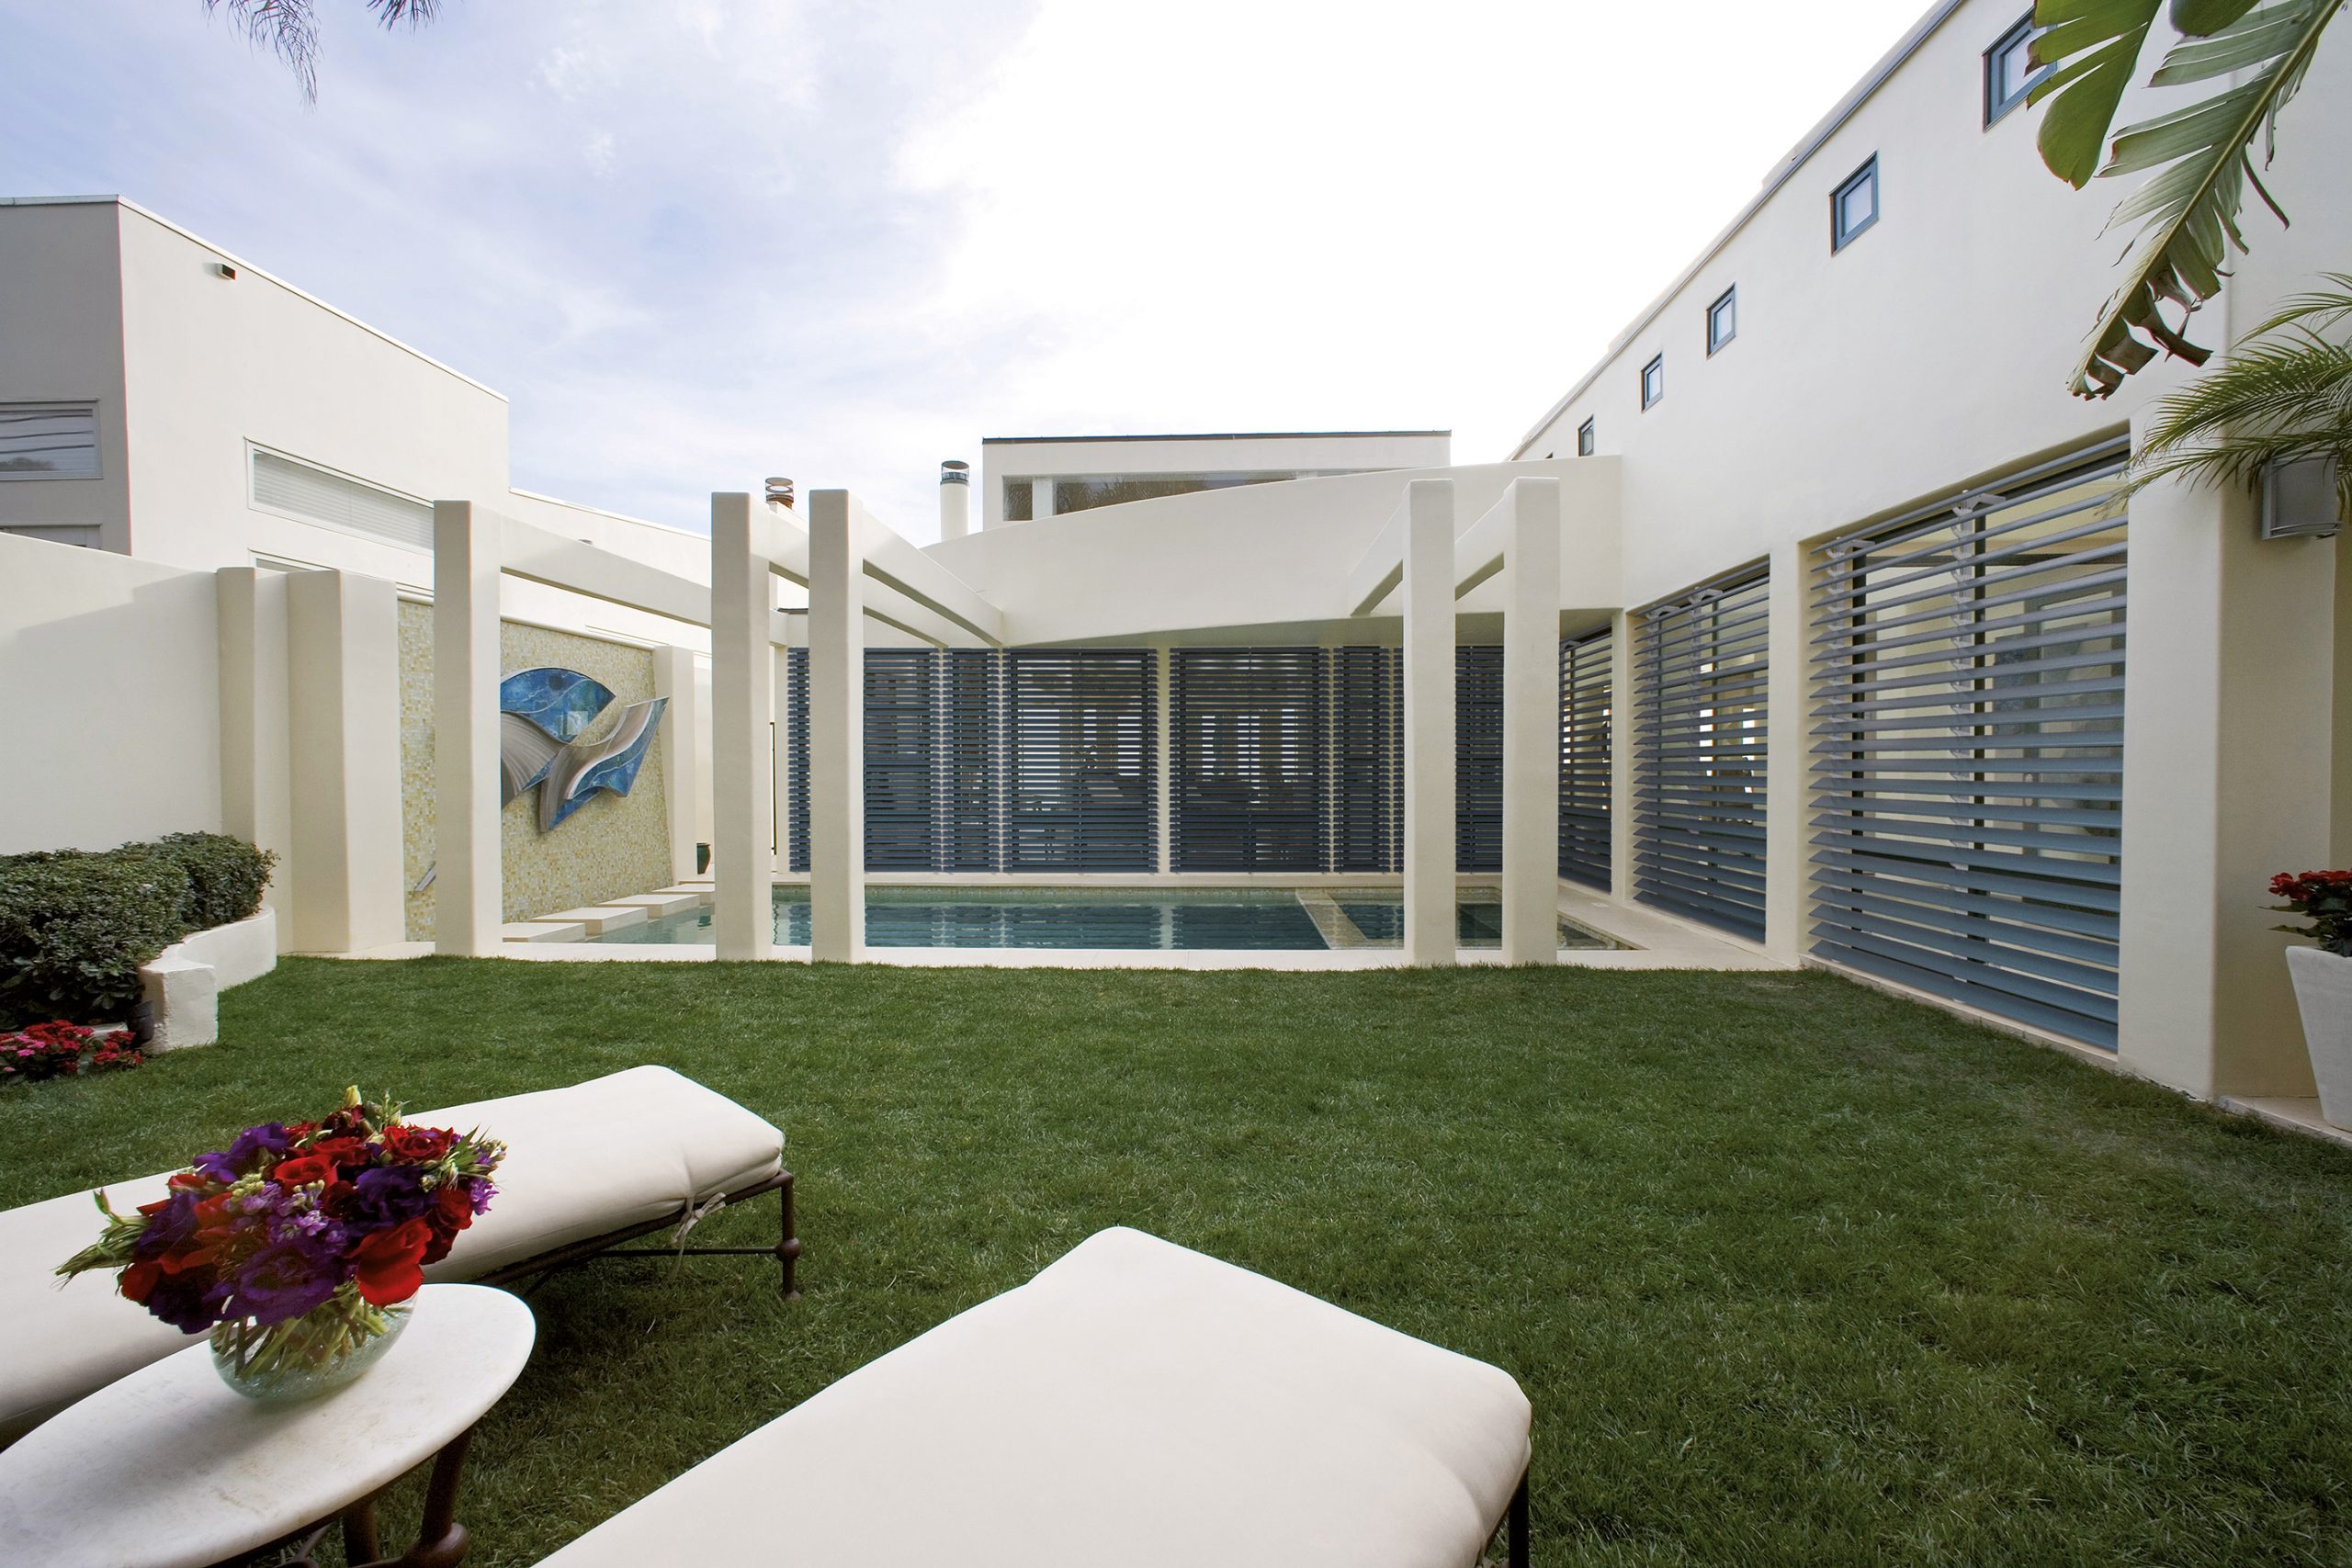 Outdoor pool area enclosed with aluminium shutters